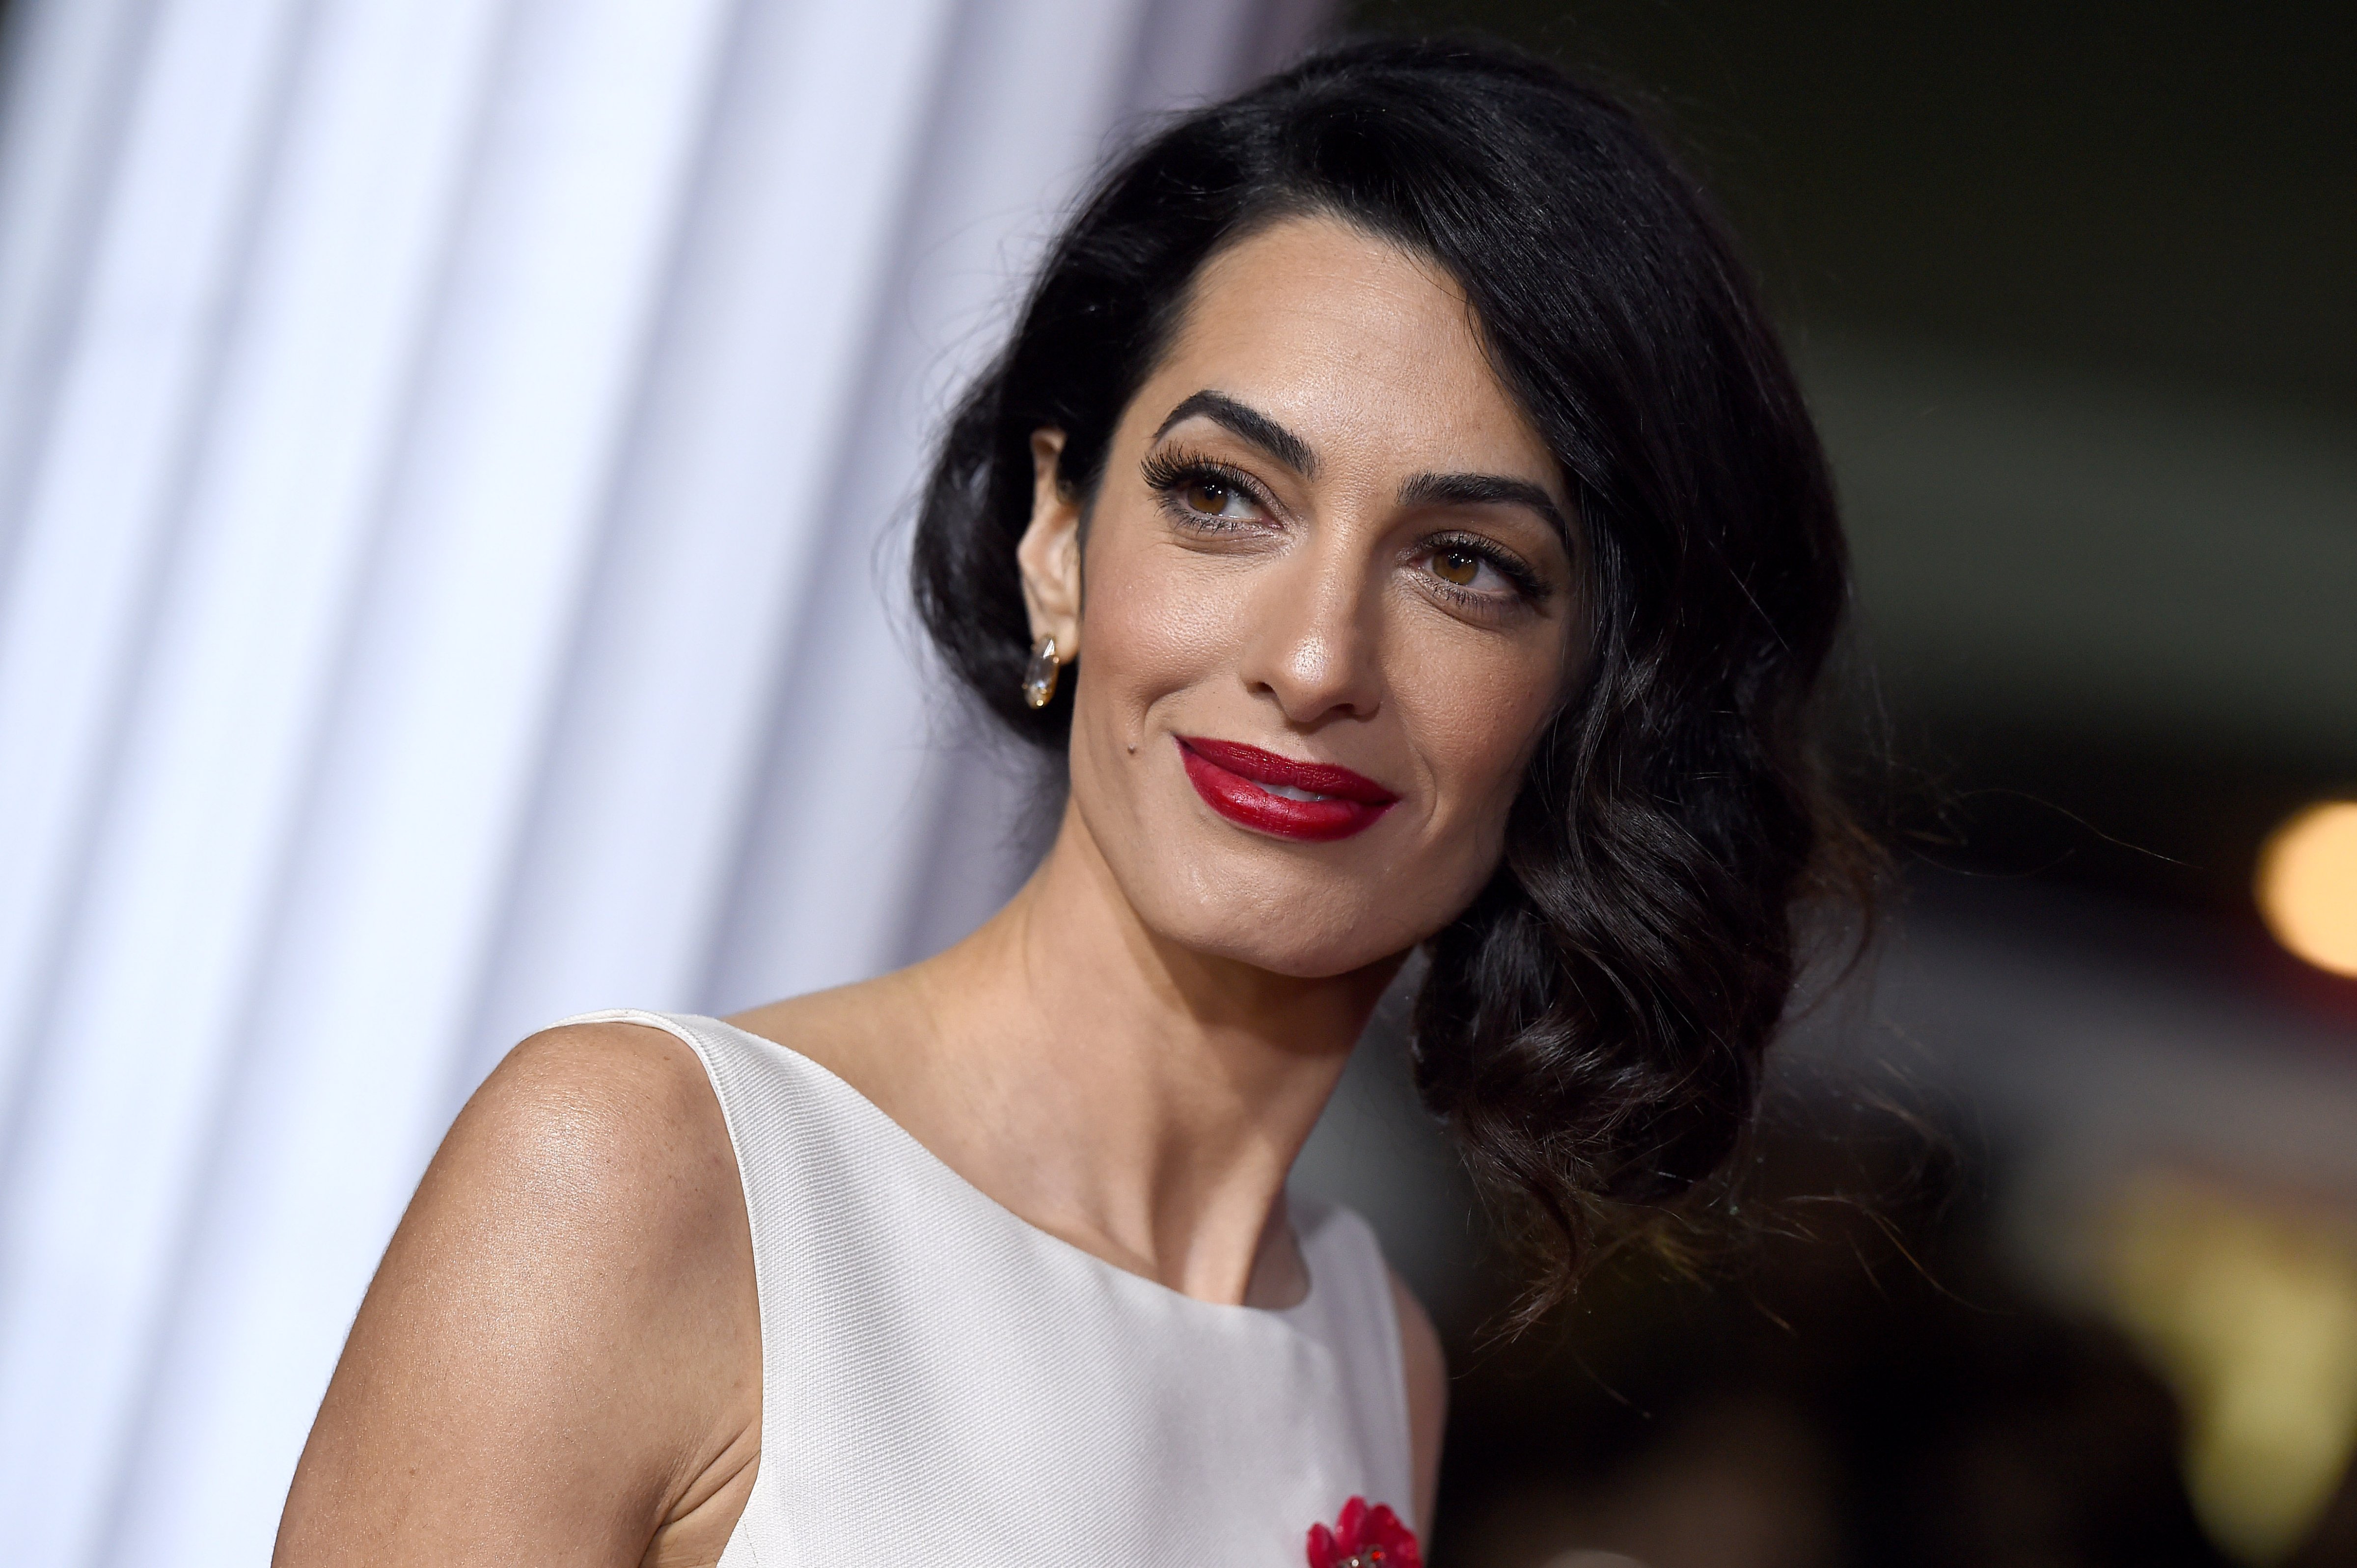 Amal Clooney in Wesywood, CA on Feb. 1, 2016. (Axelle/Bauer-Griffin—Getty Images)